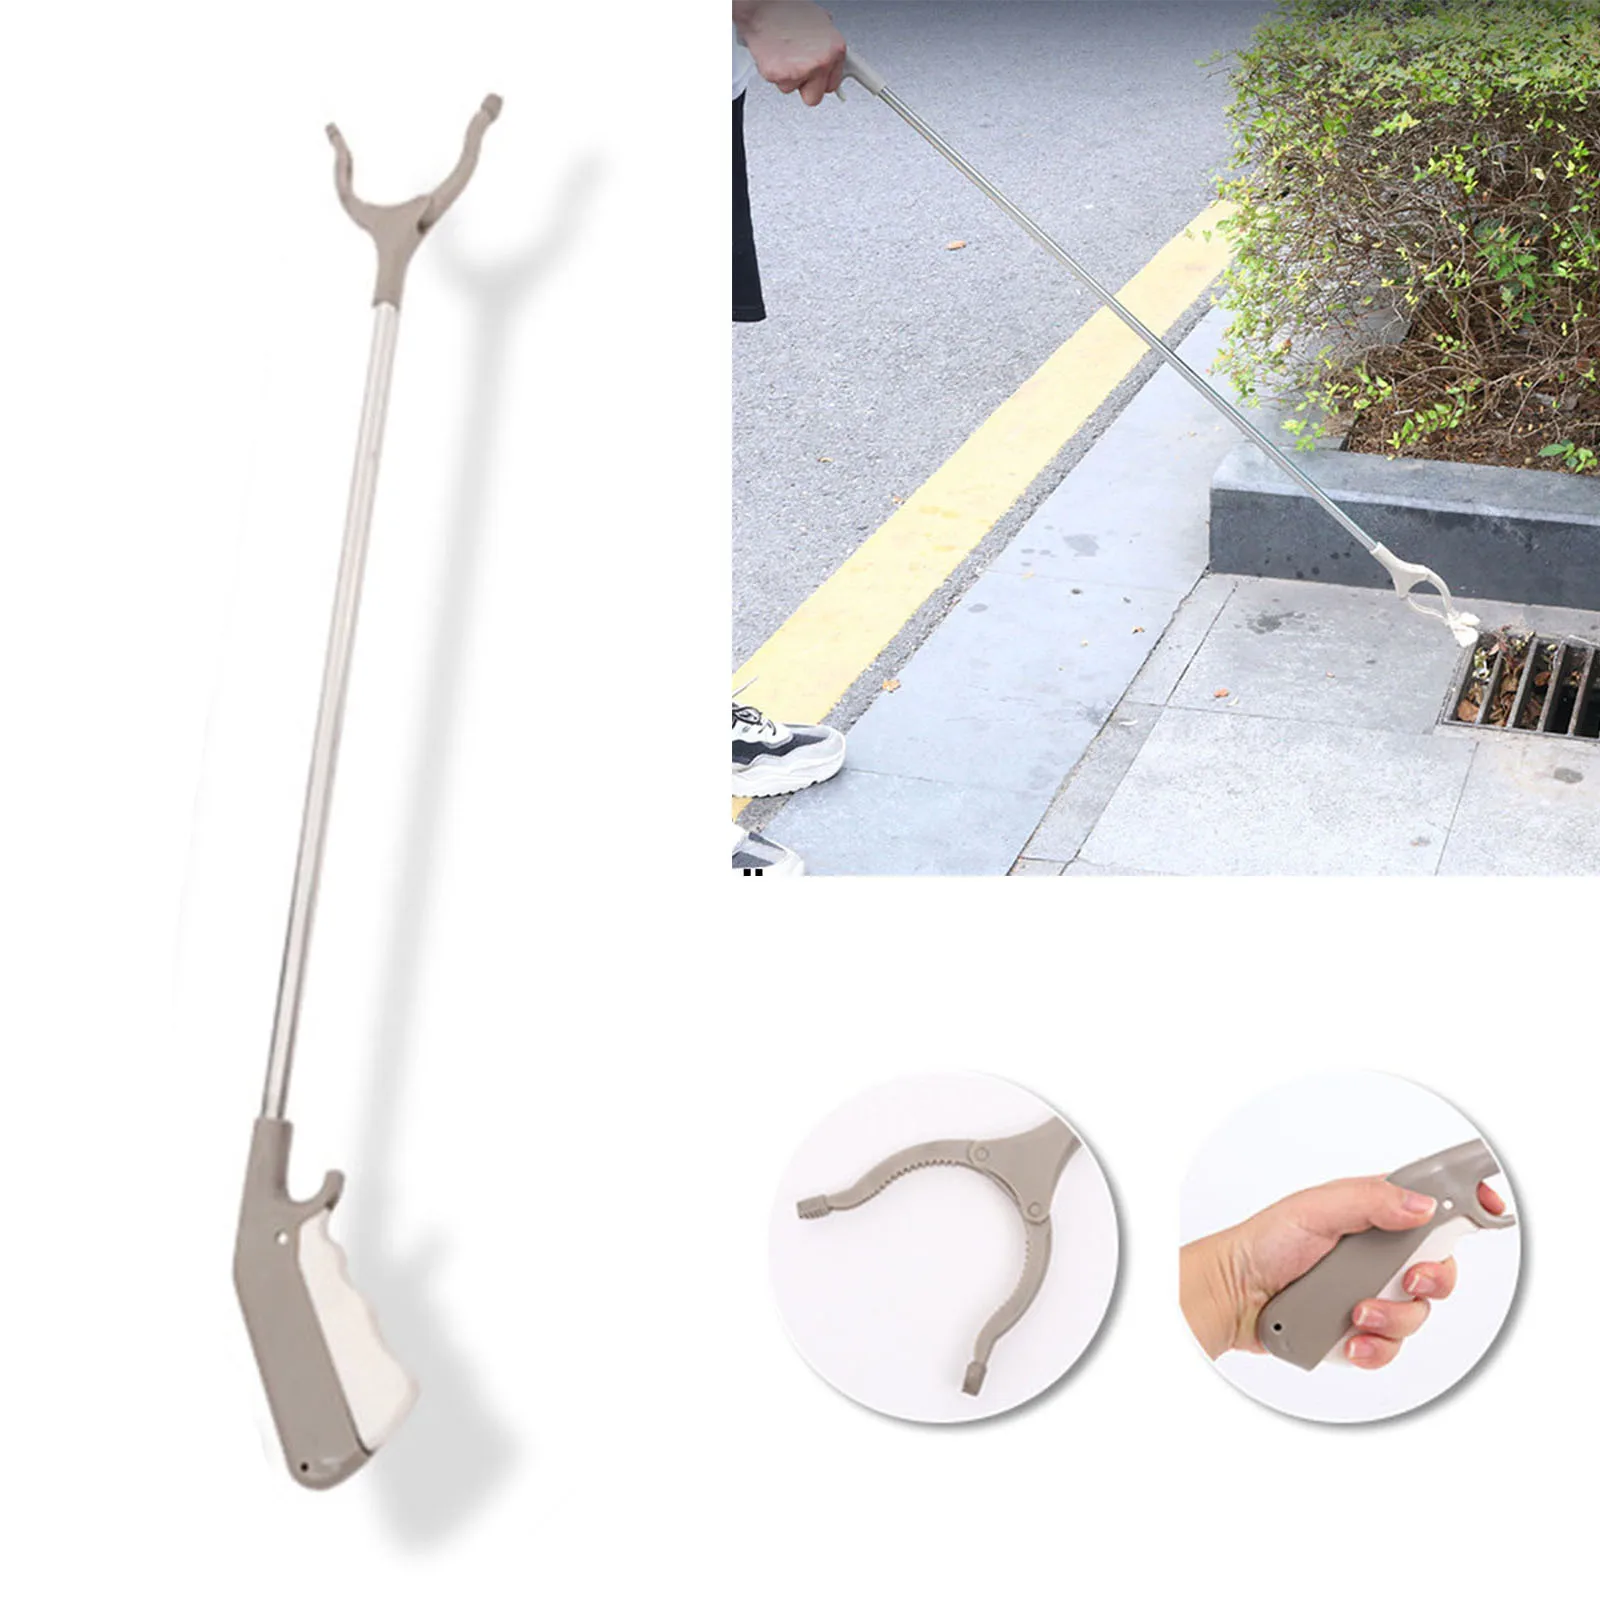 Litter Reachers Pickers Pick Up Tools Extender Gripper Tool Lightweight Mobility Aid Reaching Trash Garbage Picker